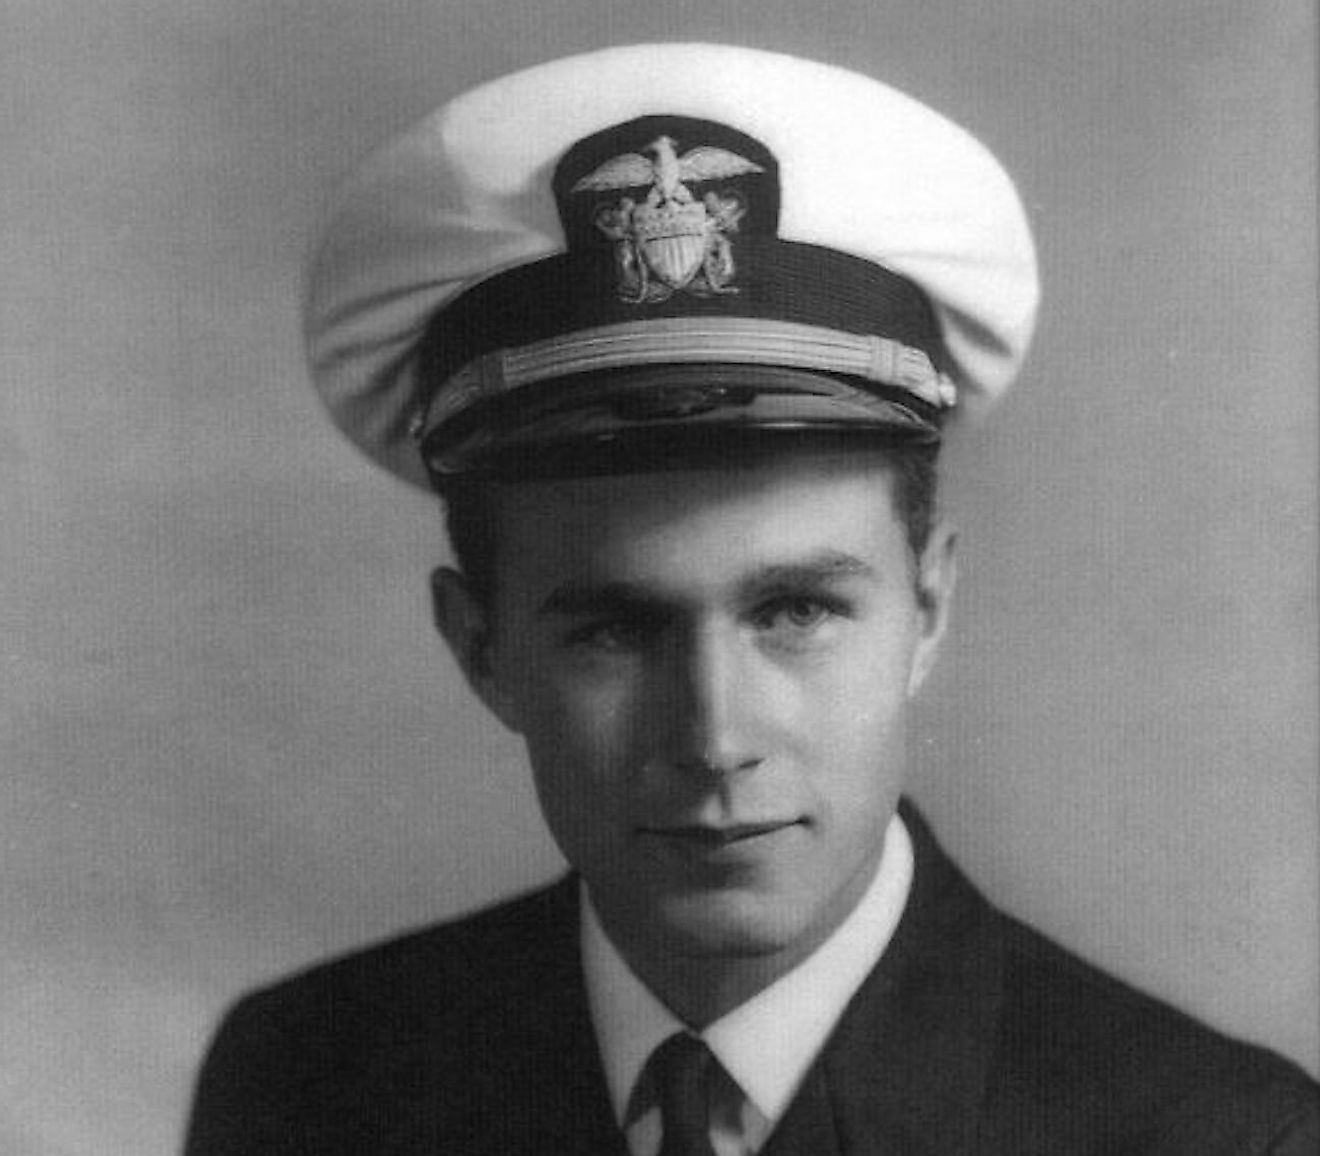 George H. W. Bush, United States Navy Portrait. Image credit: George Bush Presidential Library and Museum / Public domain